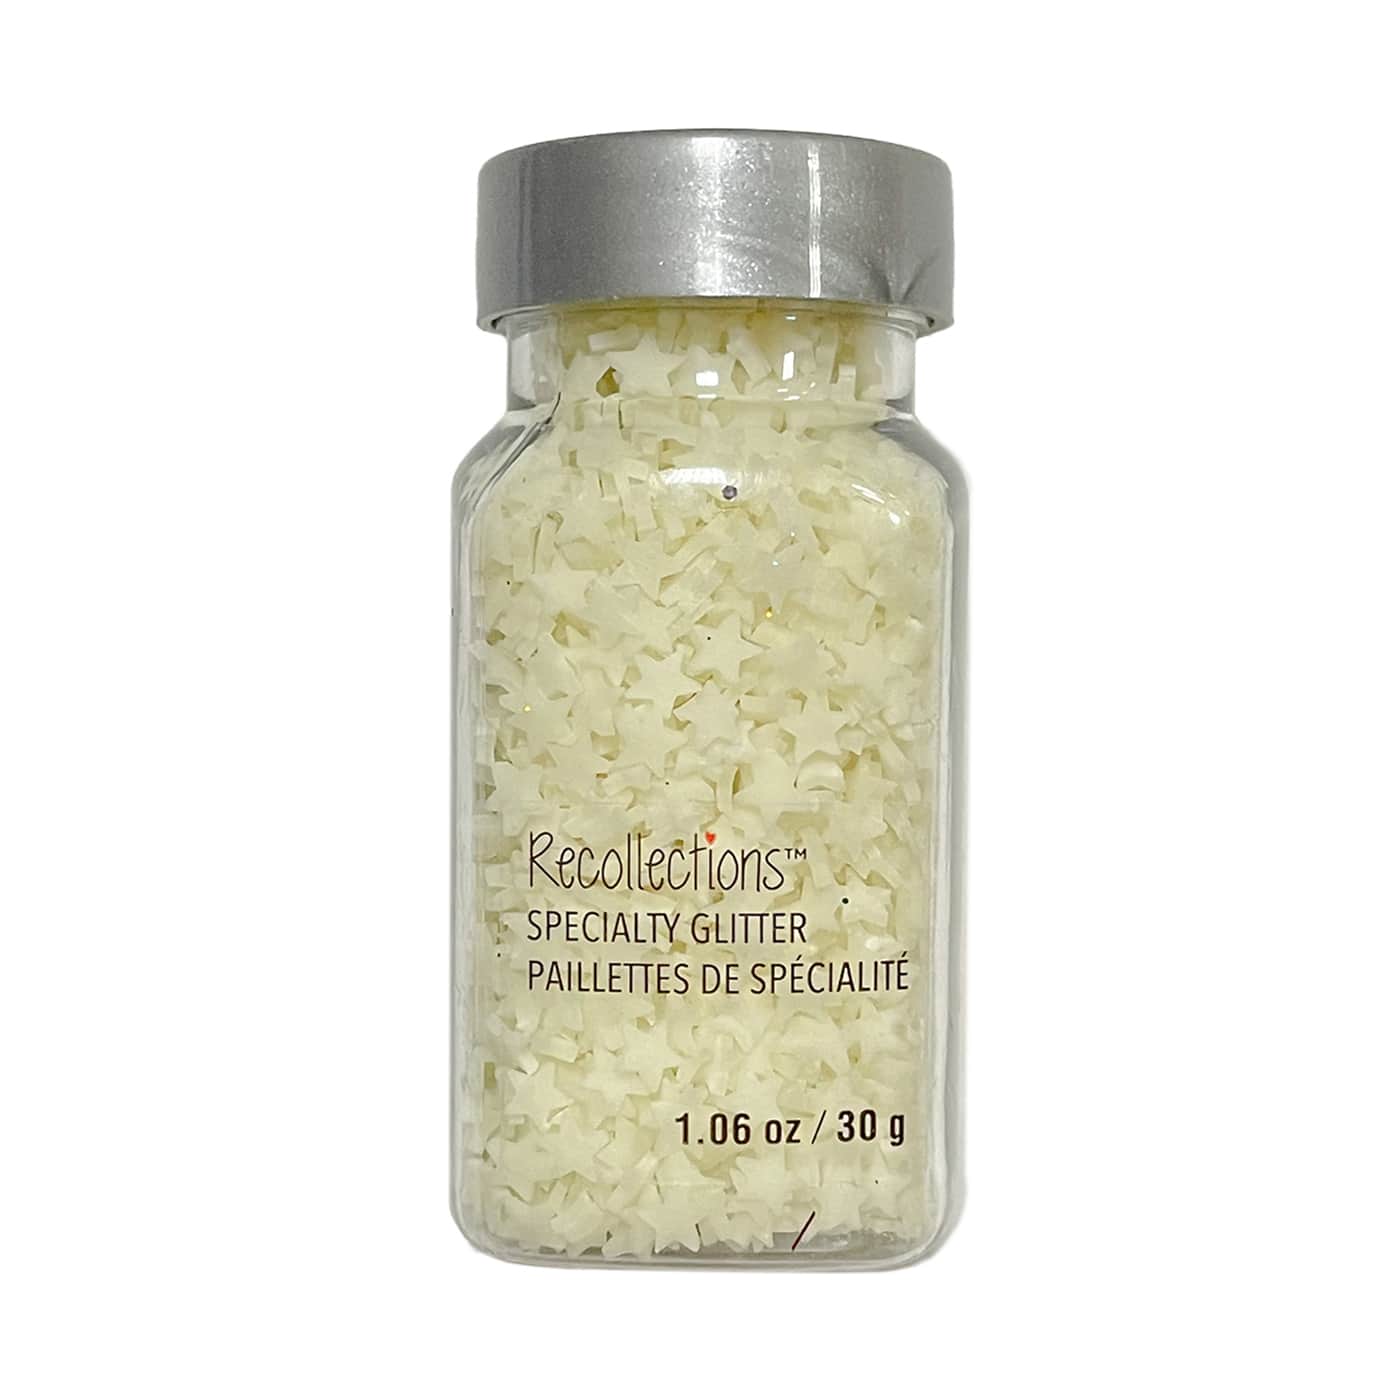 Recollections Specialty Glitter Glow-in-the-Dark Stars - 1.06 oz